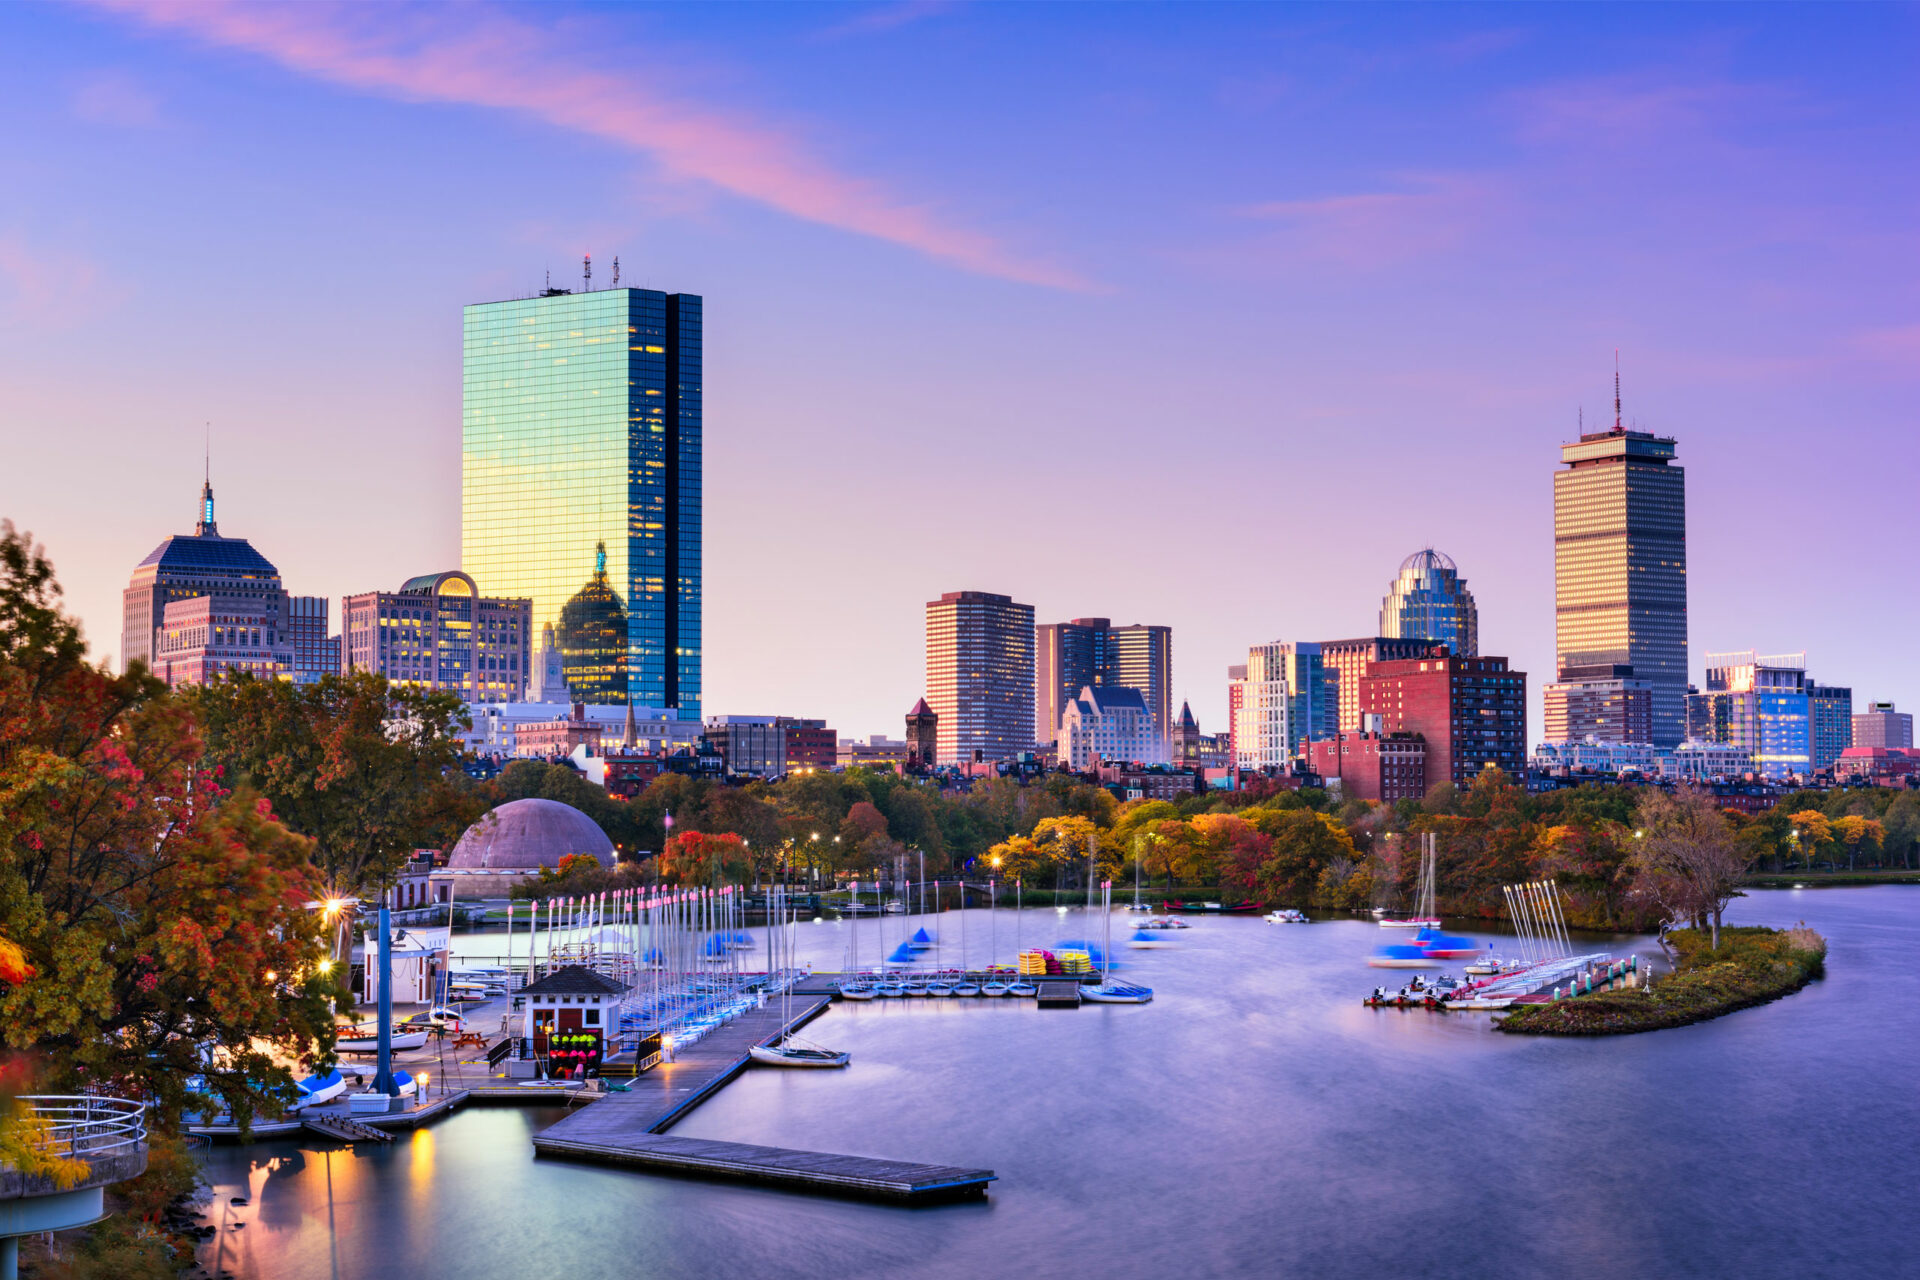 Boston Skyline. We have dream job opportunities in Toulouse, France and Boston, MA